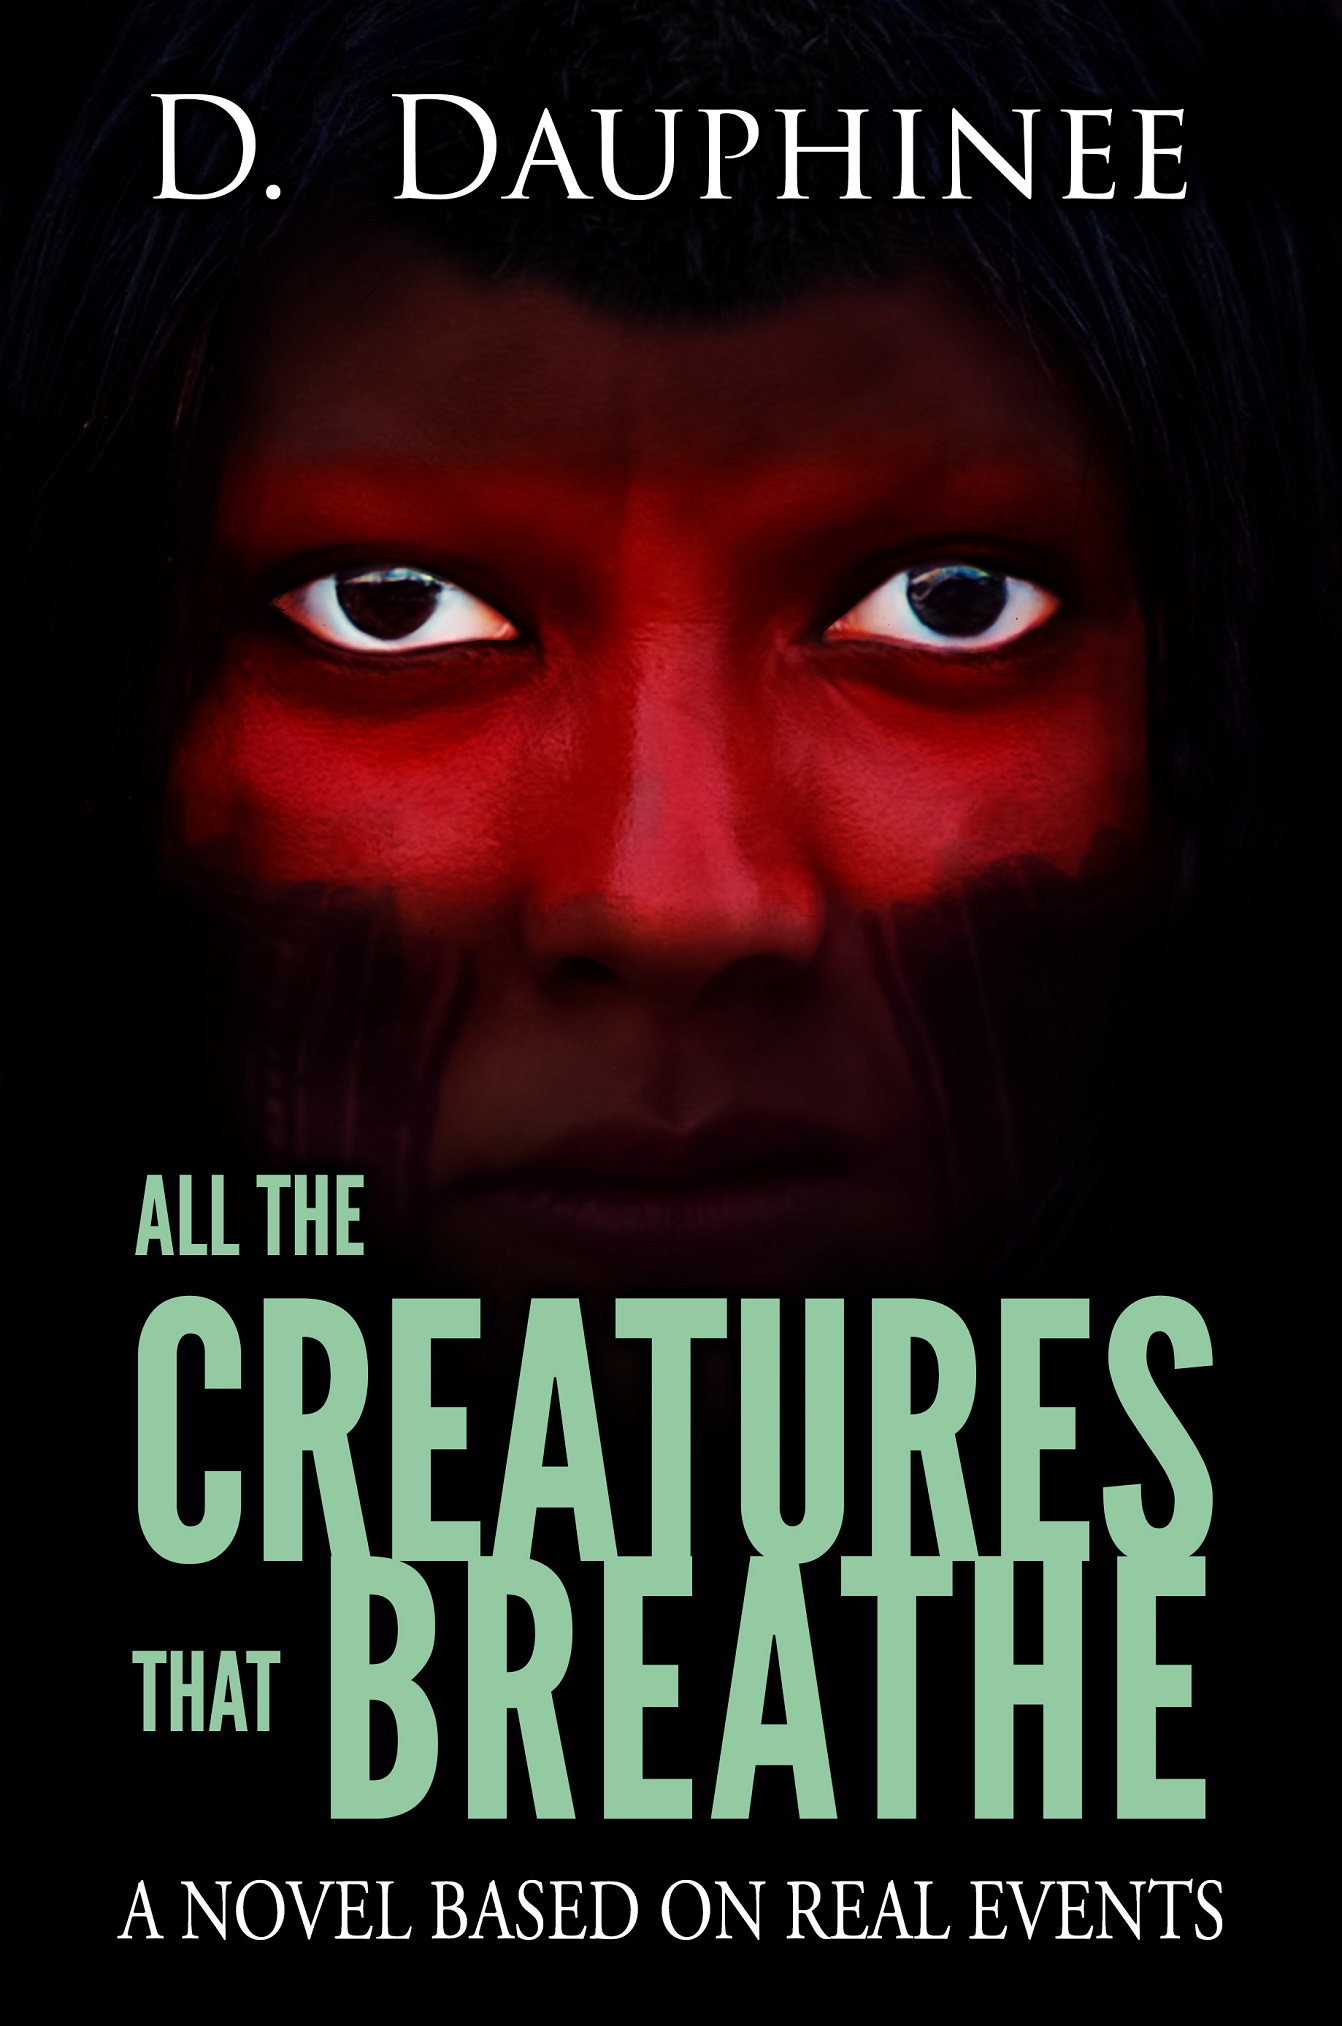 All the Creatures that Breathe by D. Dauphinee